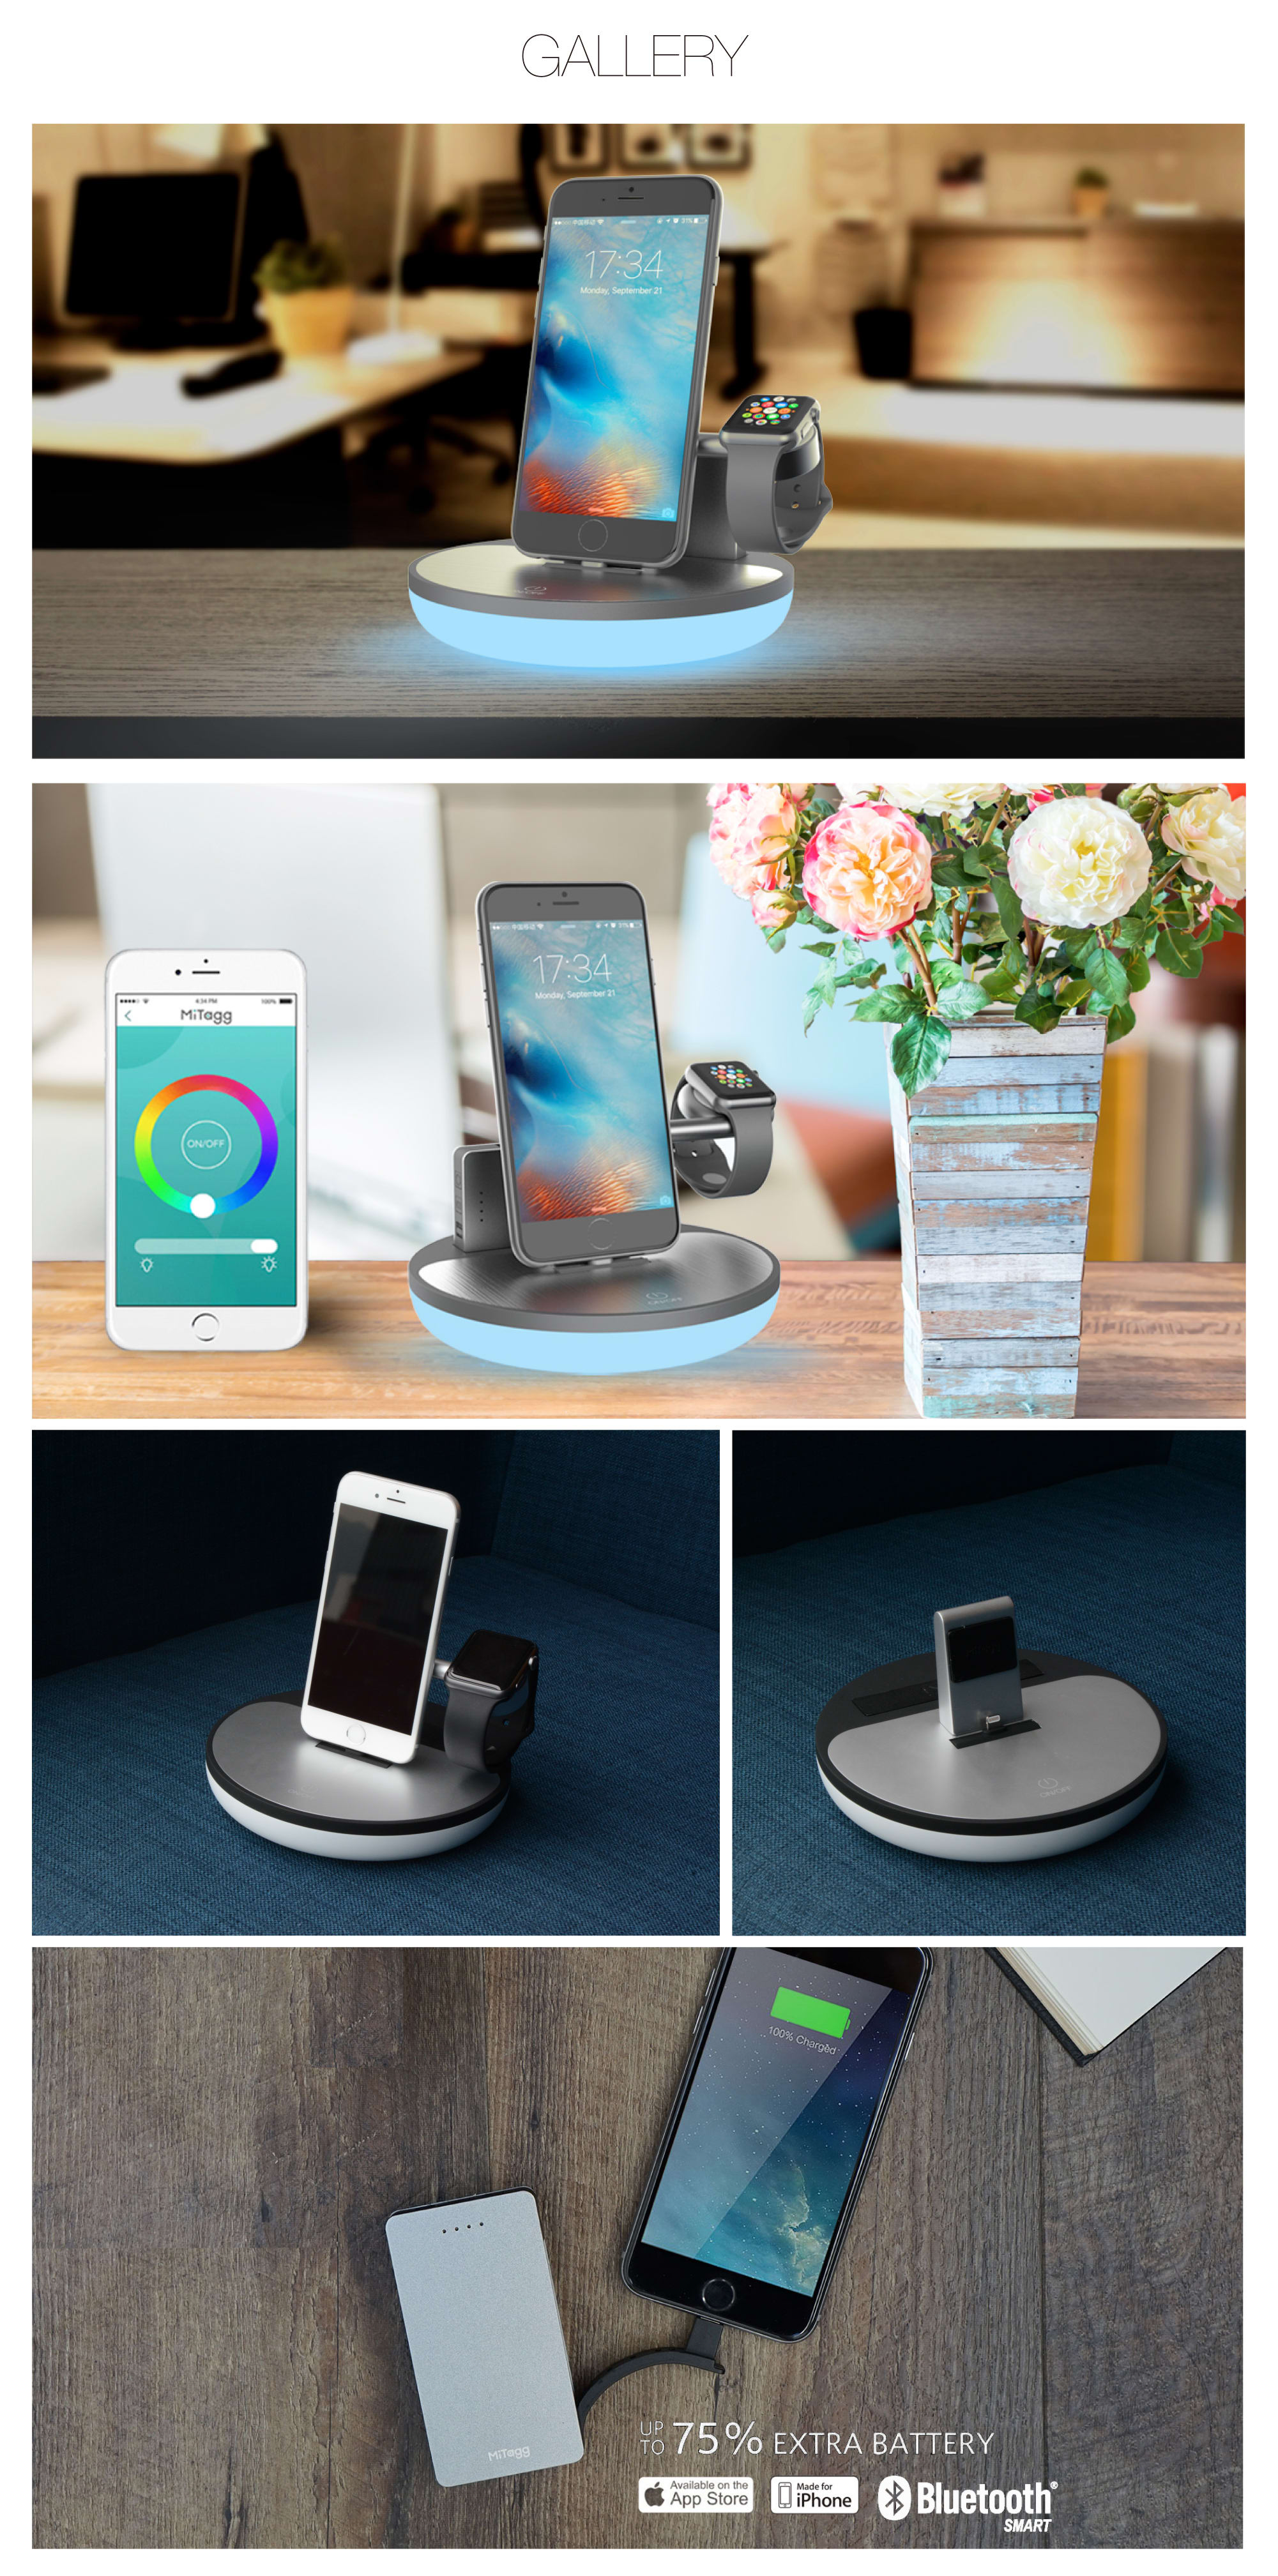 NuDock Mini World's First Connected Smart Dock Indiegogo